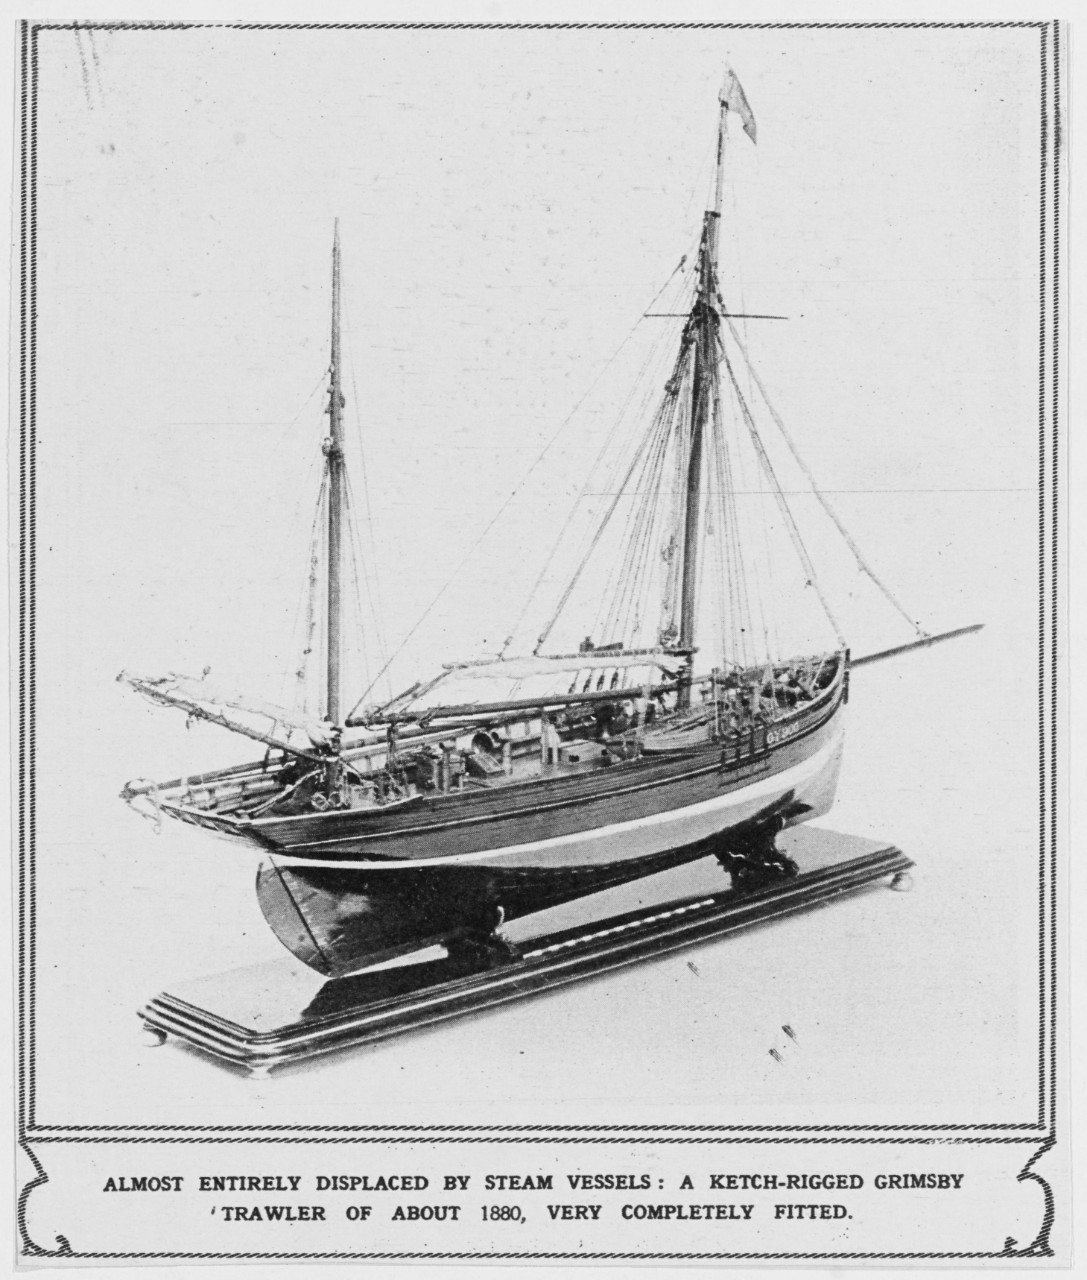 Model of a Ketch-Rigged Grimsby Trawler of about 1880